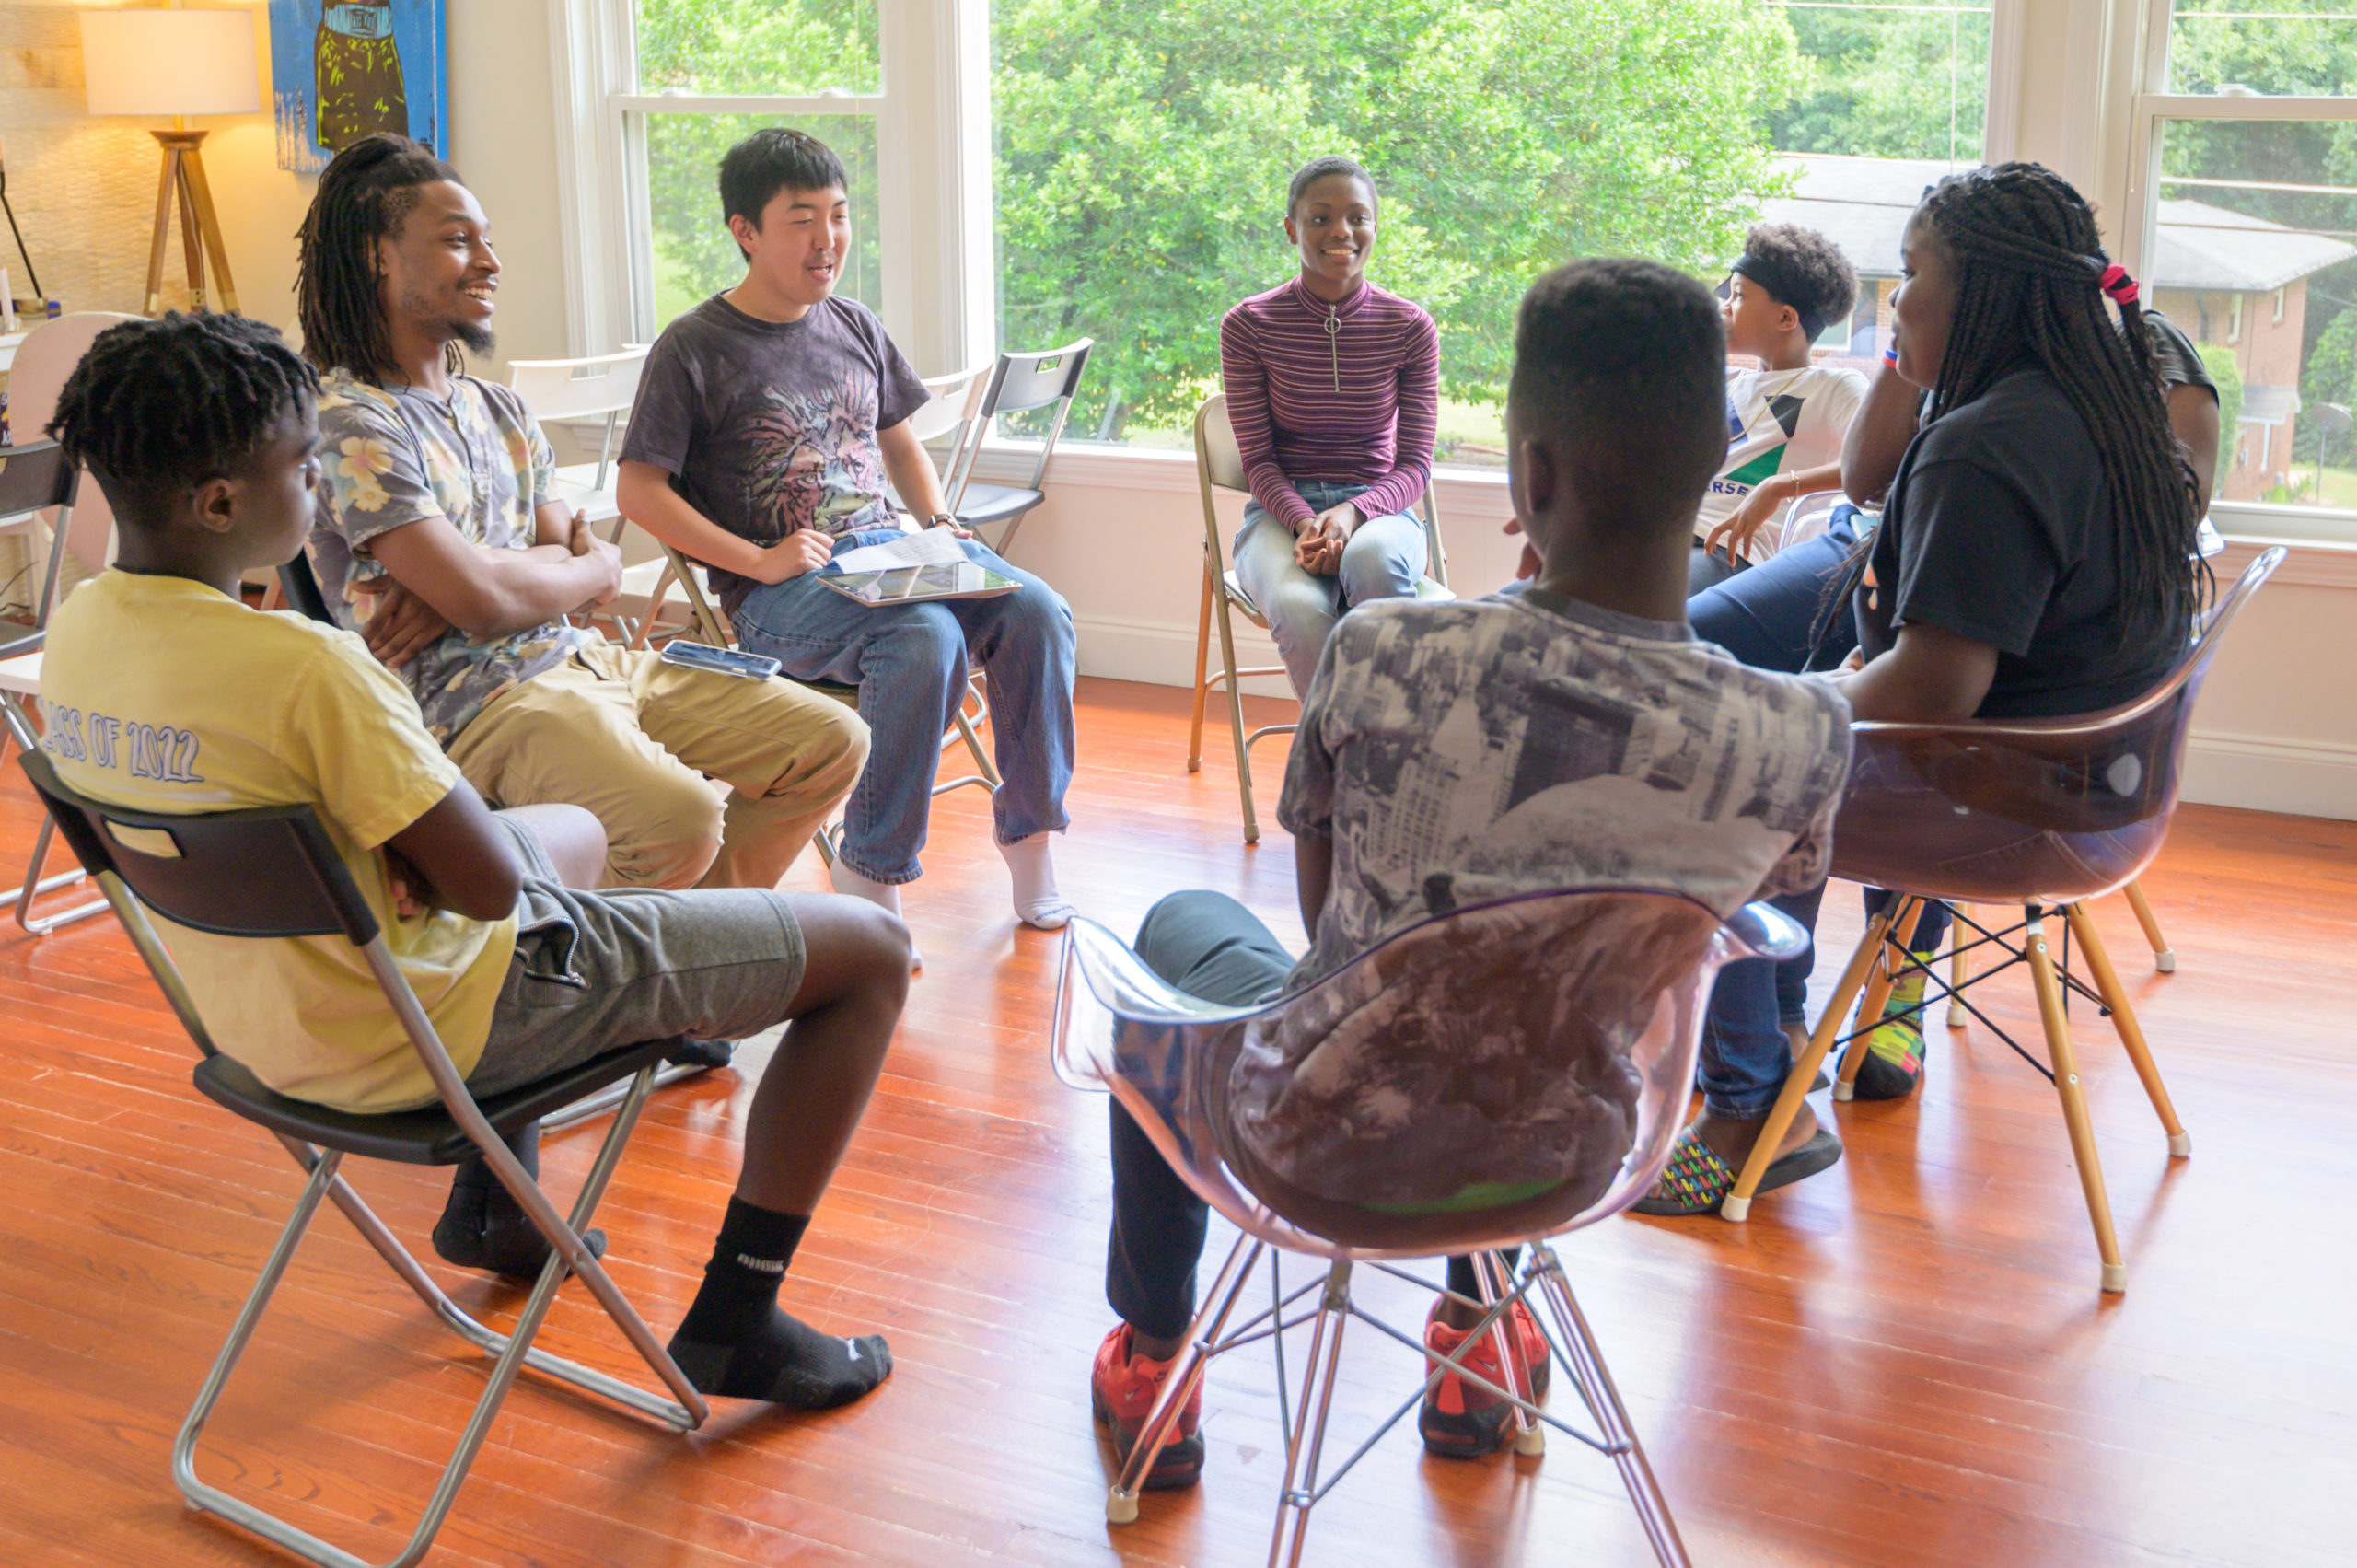 Youth dialogue at the 2019 South Zone July Youth Discussion Meeting. Photo by Anthony Wallen.